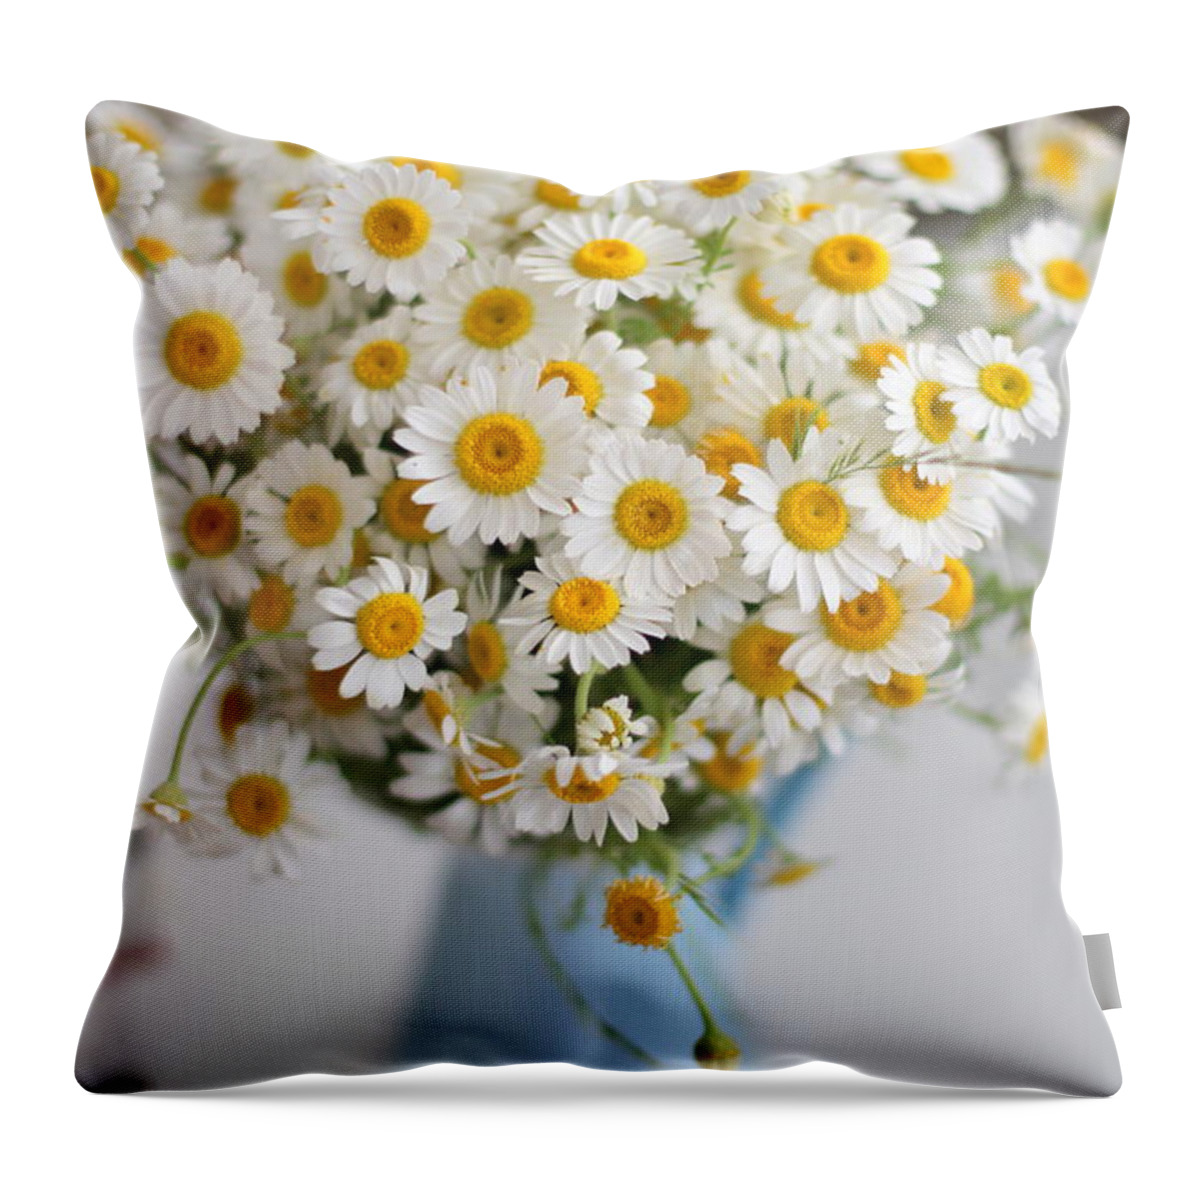 Istanbul Throw Pillow featuring the photograph Daisies In Vase by Nohut Photography